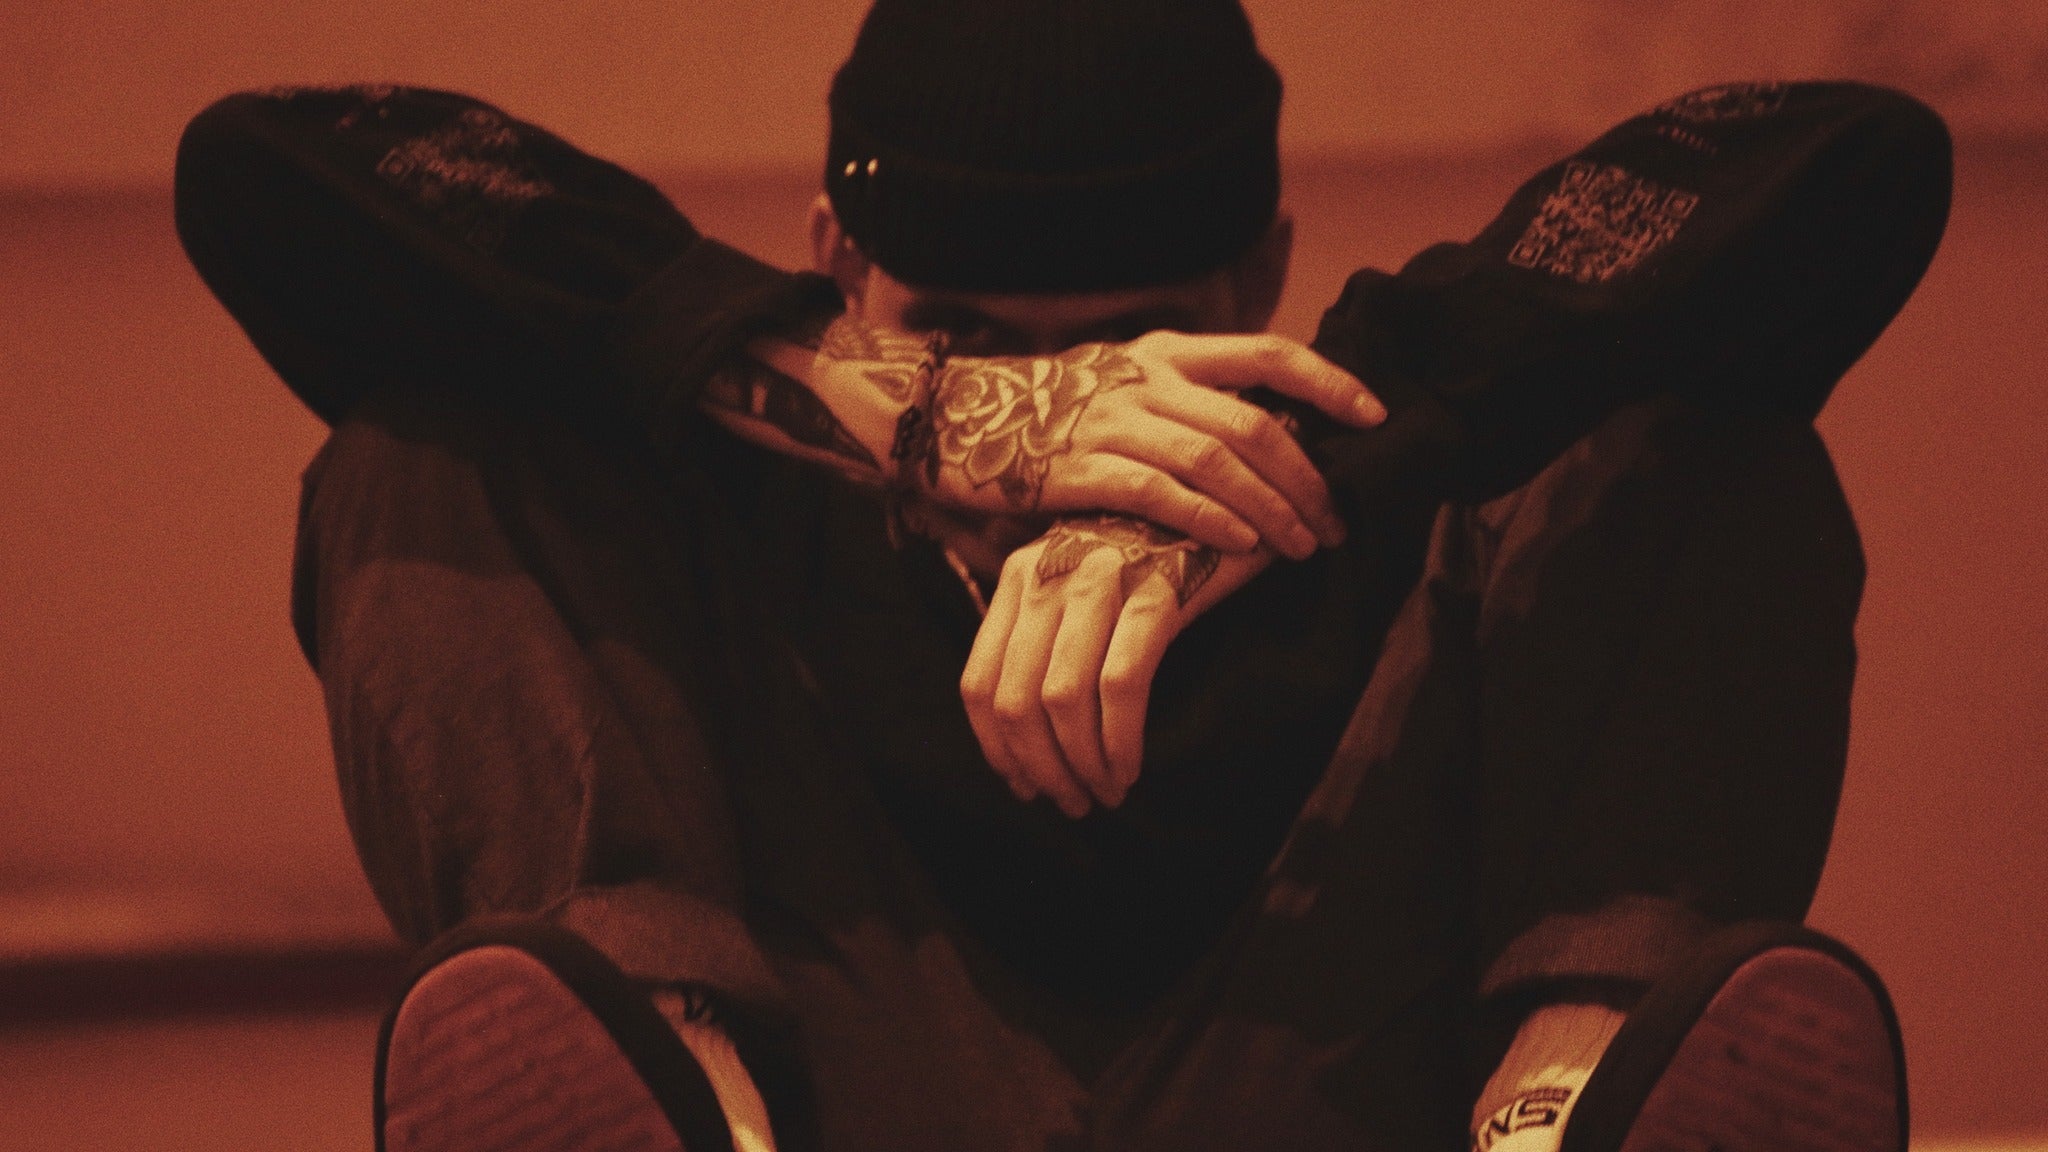 nothing,nowhere. in Boston promo photo for Bandsintown Tracker presale offer code